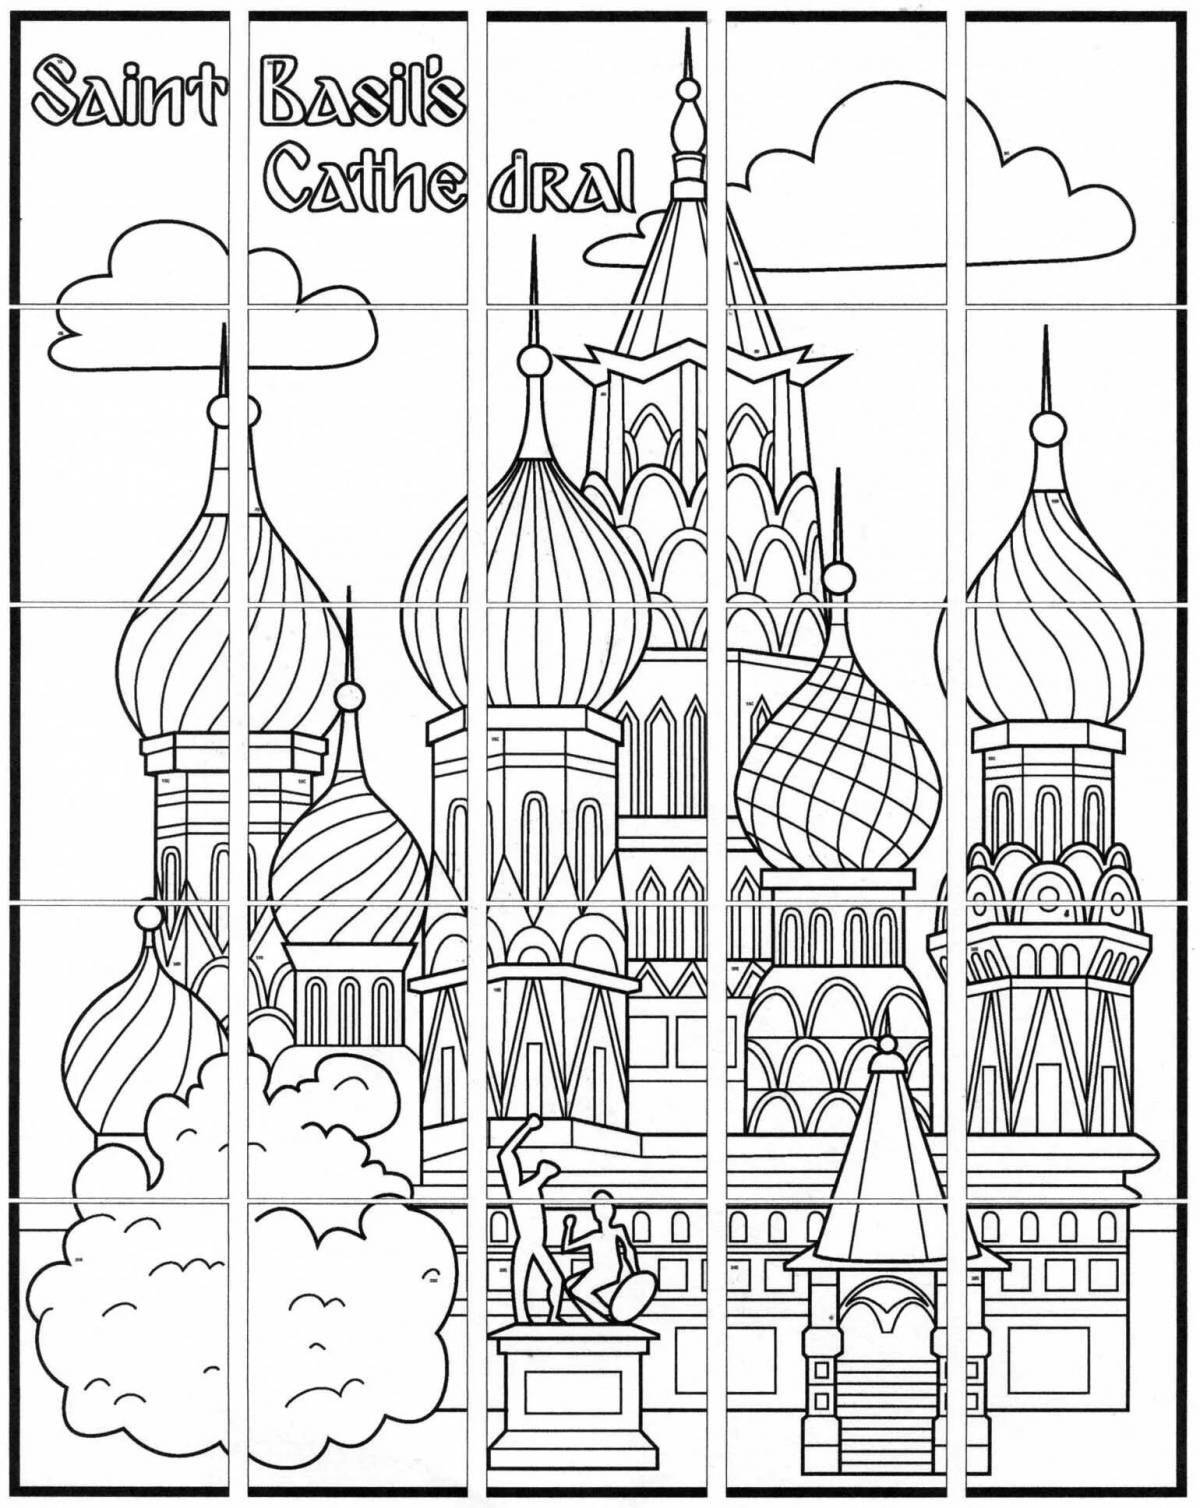 Coloring page majestic st basil's church